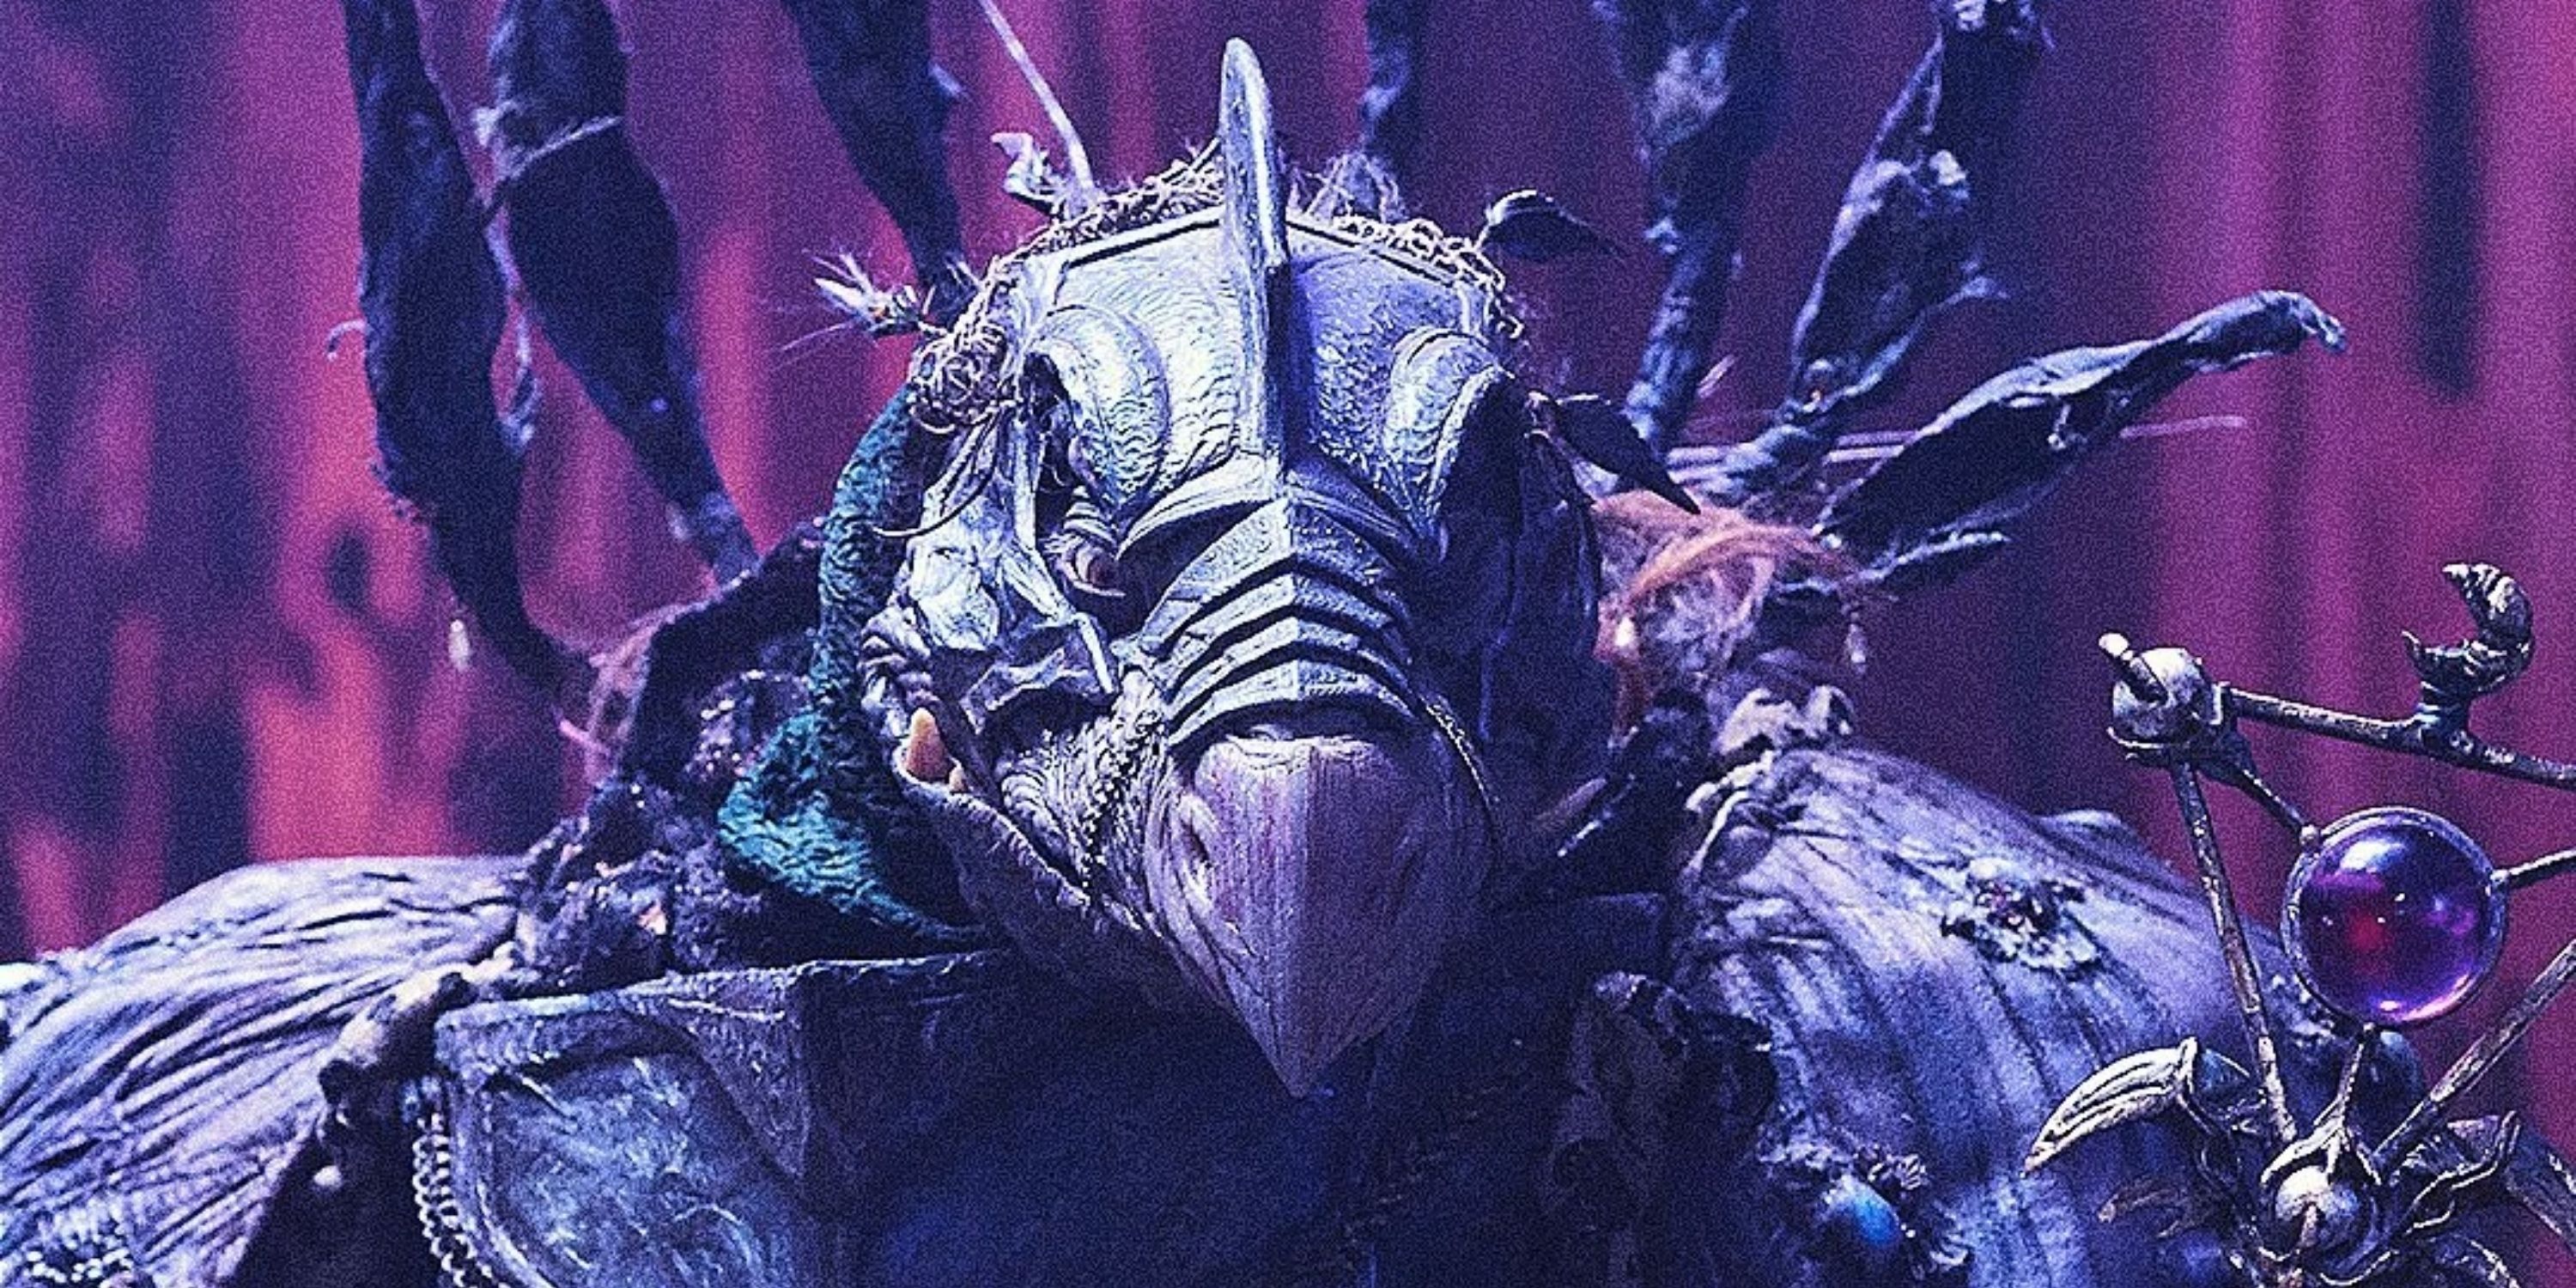 The General from The Dark Crystal